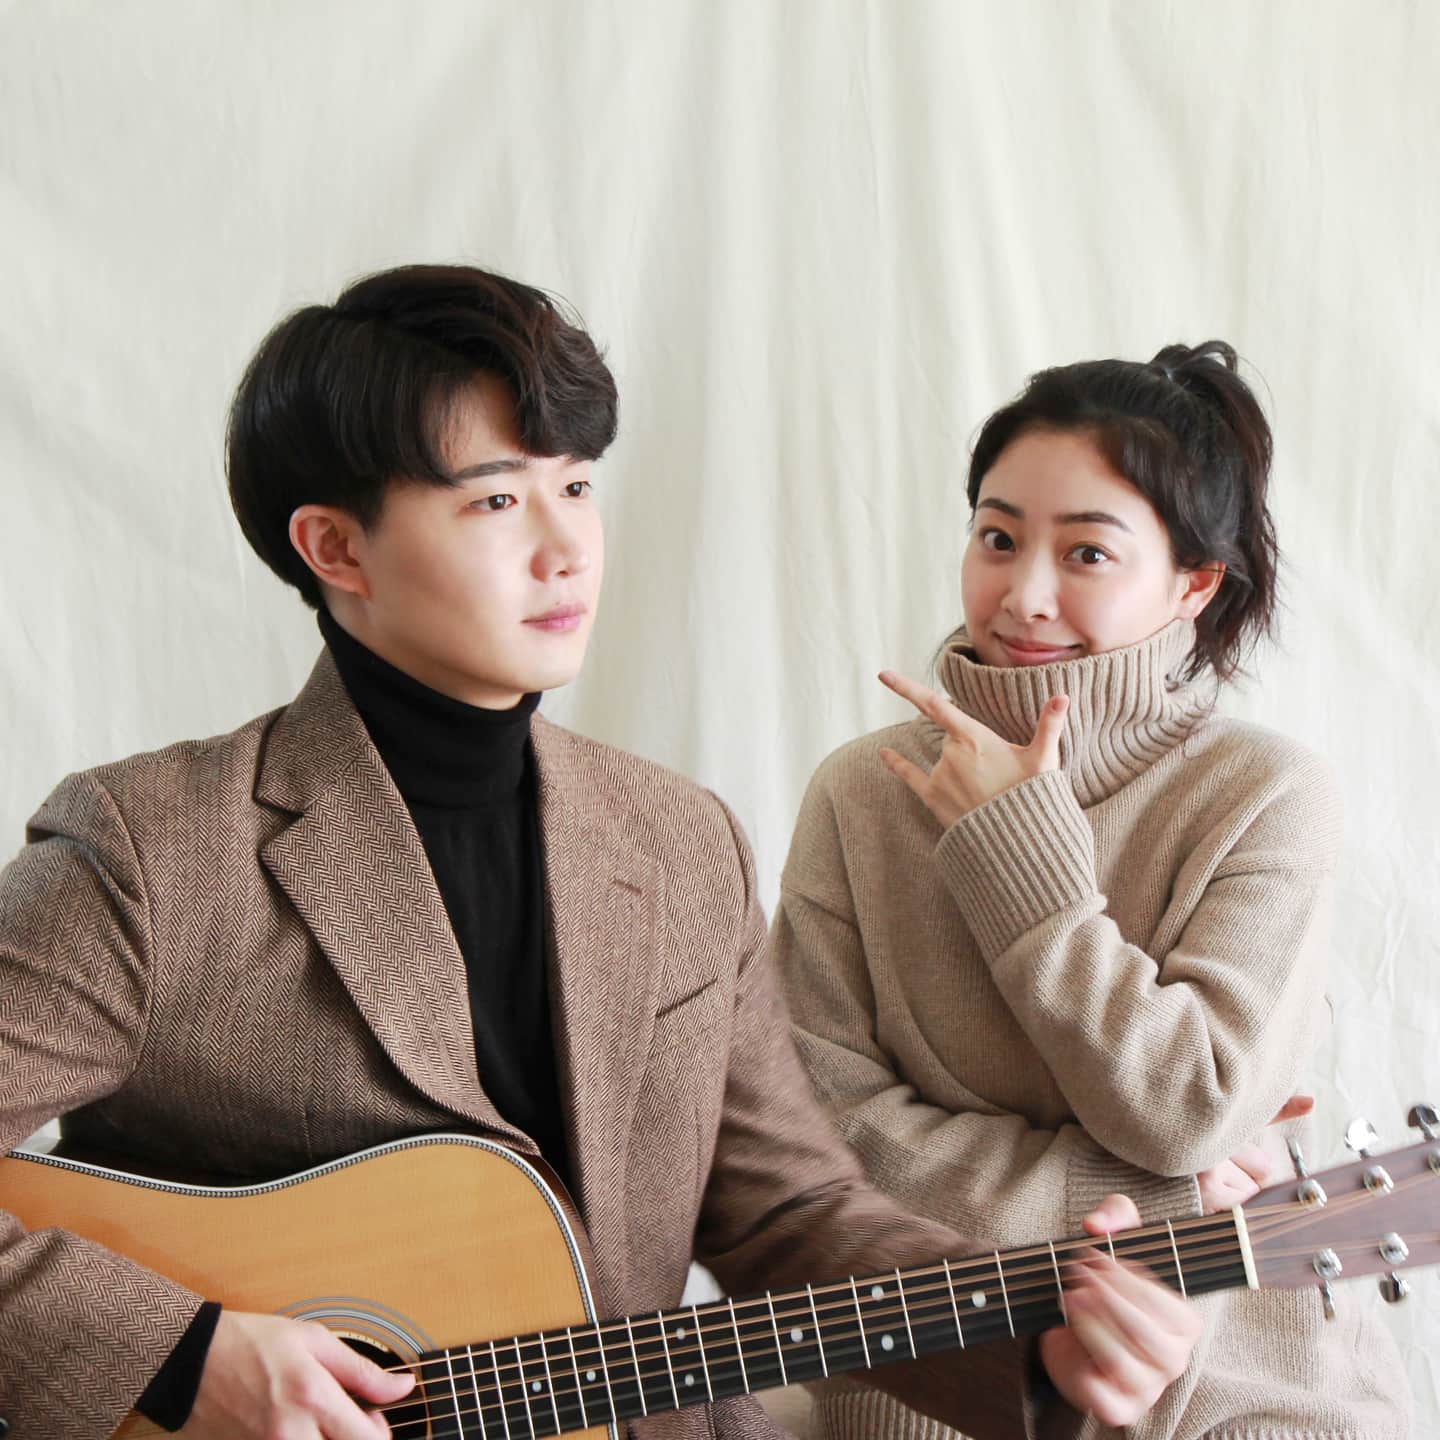 Sibling duo Harryan Yoonsoan releases a new song on the 22nd